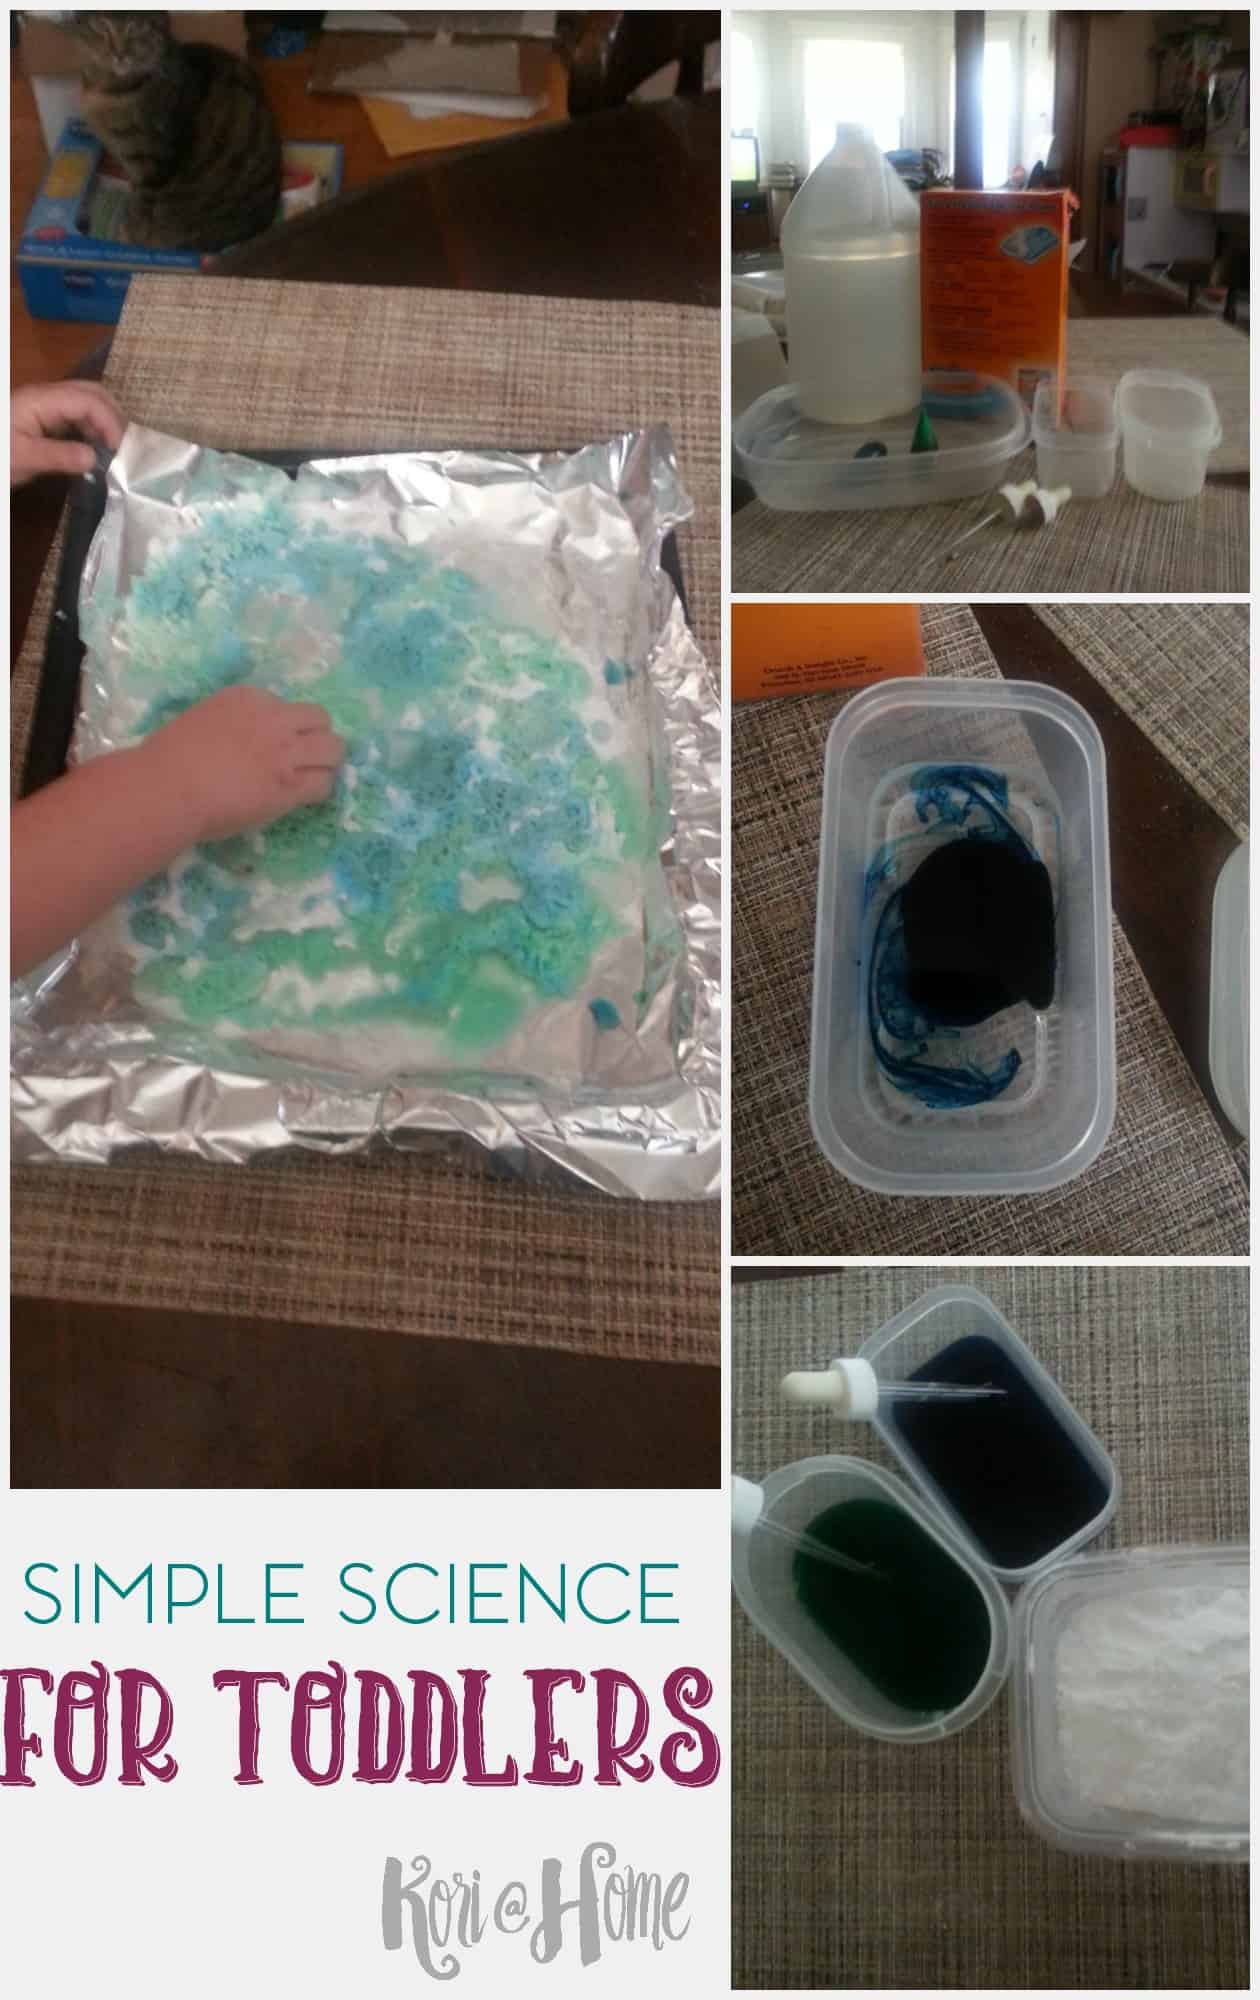 We're going to start a series of simple science for toddlers experiences and first up is a classic: baking soda and vinegar.